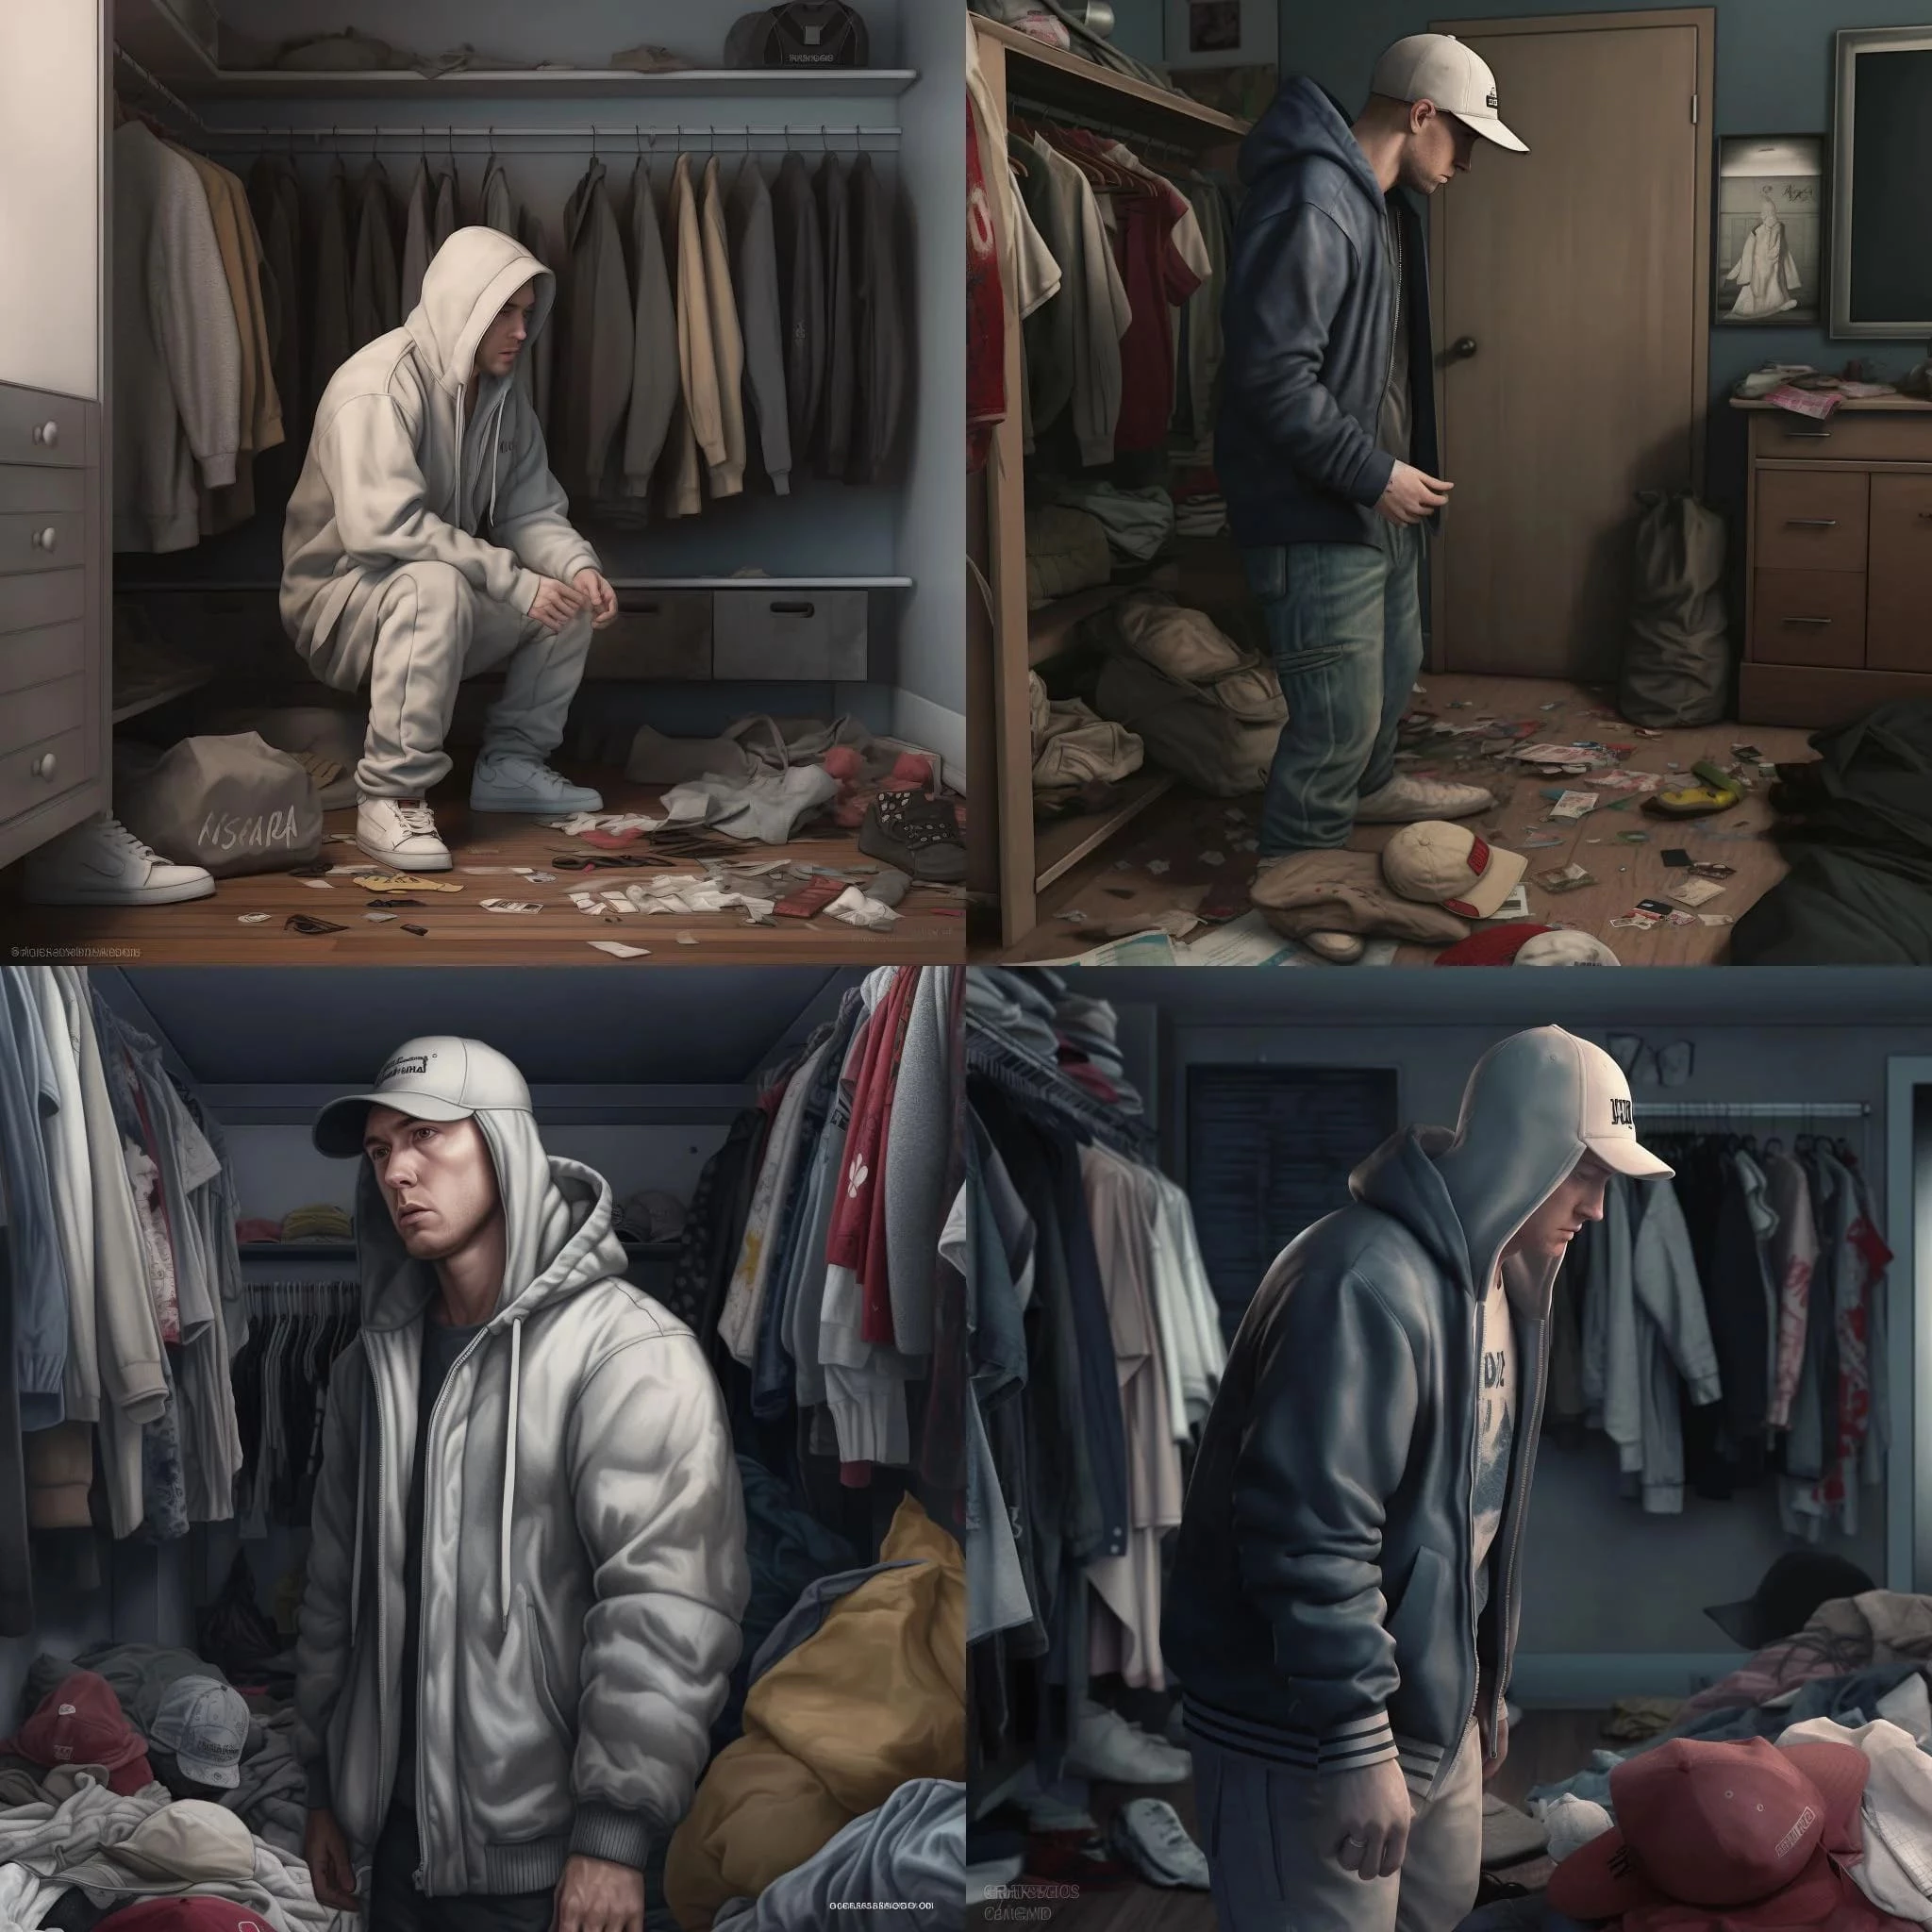 Eminem Cleaning Out His Closet